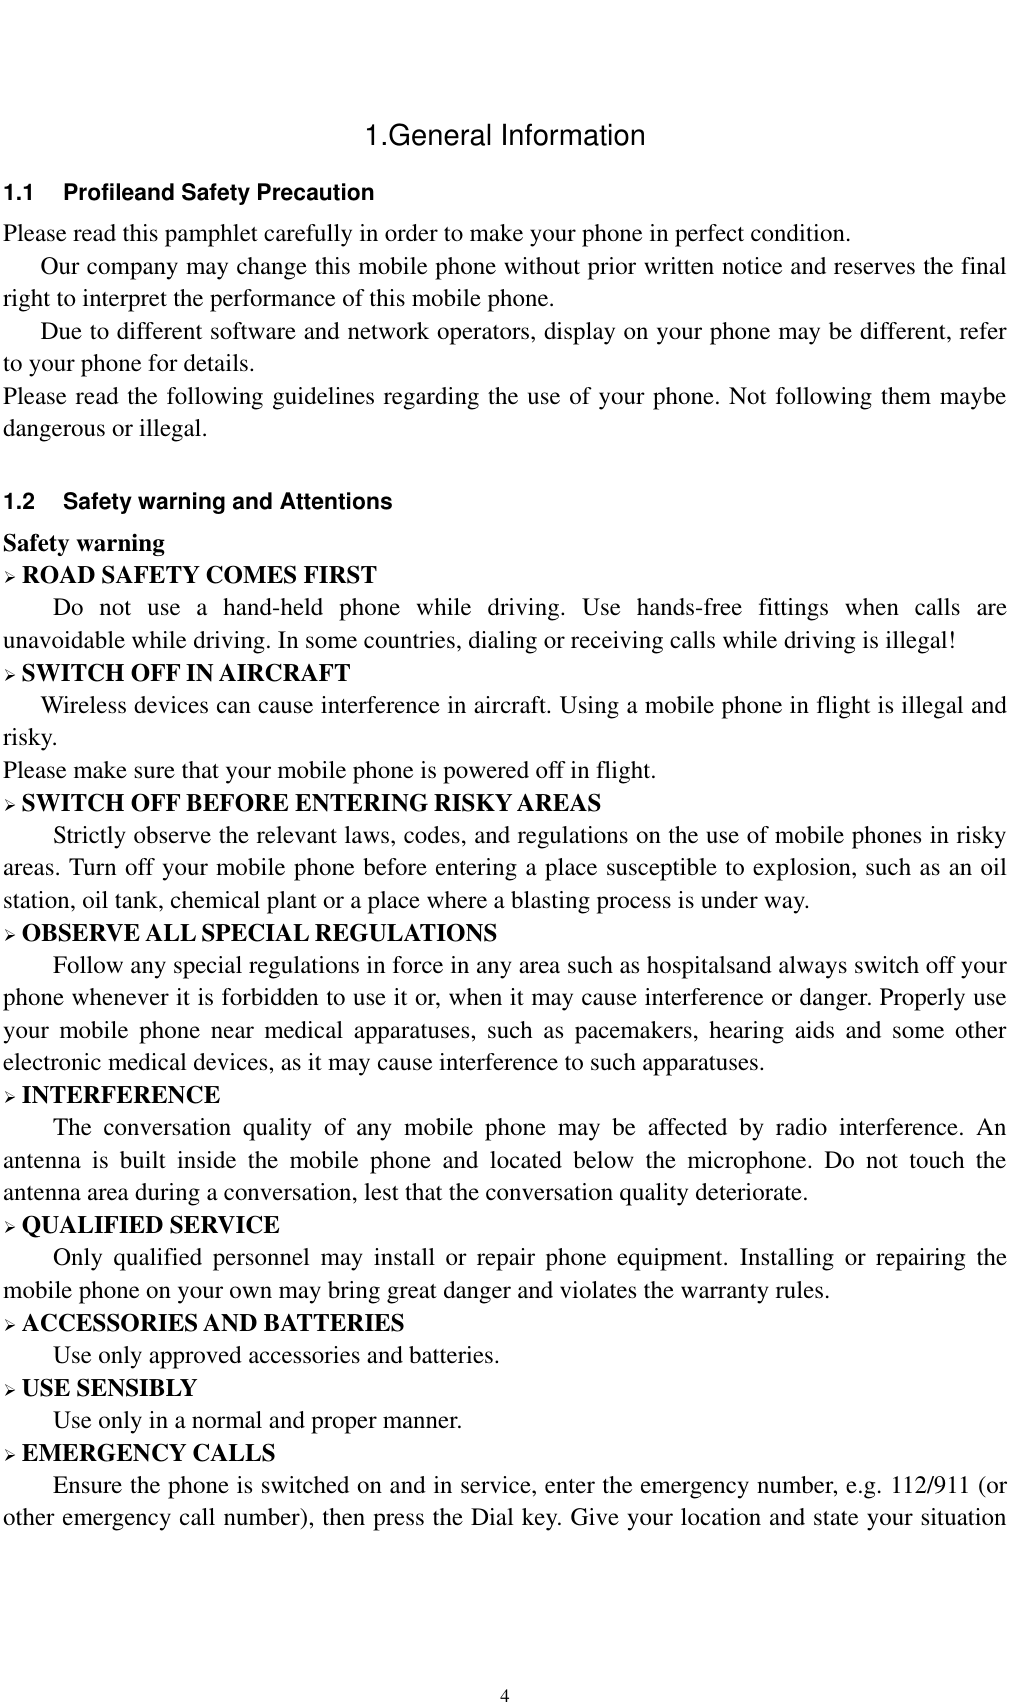    4 1.General Information 1.1  Profileand Safety Precaution Please read this pamphlet carefully in order to make your phone in perfect condition.    Our company may change this mobile phone without prior written notice and reserves the final right to interpret the performance of this mobile phone.    Due to different software and network operators, display on your phone may be different, refer to your phone for details. Please read the following guidelines regarding the use of your phone. Not following them maybe dangerous or illegal.  1.2  Safety warning and Attentions Safety warning  ROAD SAFETY COMES FIRST Do  not  use  a  hand-held  phone  while  driving.  Use  hands-free  fittings  when  calls  are unavoidable while driving. In some countries, dialing or receiving calls while driving is illegal!  SWITCH OFF IN AIRCRAFT Wireless devices can cause interference in aircraft. Using a mobile phone in flight is illegal and risky.     Please make sure that your mobile phone is powered off in flight.  SWITCH OFF BEFORE ENTERING RISKY AREAS Strictly observe the relevant laws, codes, and regulations on the use of mobile phones in risky areas. Turn off your mobile phone before entering a place susceptible to explosion, such as an oil station, oil tank, chemical plant or a place where a blasting process is under way.  OBSERVE ALL SPECIAL REGULATIONS Follow any special regulations in force in any area such as hospitalsand always switch off your phone whenever it is forbidden to use it or, when it may cause interference or danger. Properly use your  mobile  phone  near  medical  apparatuses,  such  as  pacemakers,  hearing  aids  and  some other electronic medical devices, as it may cause interference to such apparatuses.  INTERFERENCE The  conversation  quality  of  any  mobile  phone  may  be  affected  by  radio  interference.  An antenna  is  built  inside  the  mobile  phone  and  located  below  the  microphone.  Do  not  touch  the antenna area during a conversation, lest that the conversation quality deteriorate.  QUALIFIED SERVICE Only  qualified  personnel  may  install  or  repair  phone  equipment.  Installing  or  repairing  the mobile phone on your own may bring great danger and violates the warranty rules.  ACCESSORIES AND BATTERIES Use only approved accessories and batteries.  USE SENSIBLY Use only in a normal and proper manner.  EMERGENCY CALLS Ensure the phone is switched on and in service, enter the emergency number, e.g. 112/911 (or other emergency call number), then press the Dial key. Give your location and state your situation 